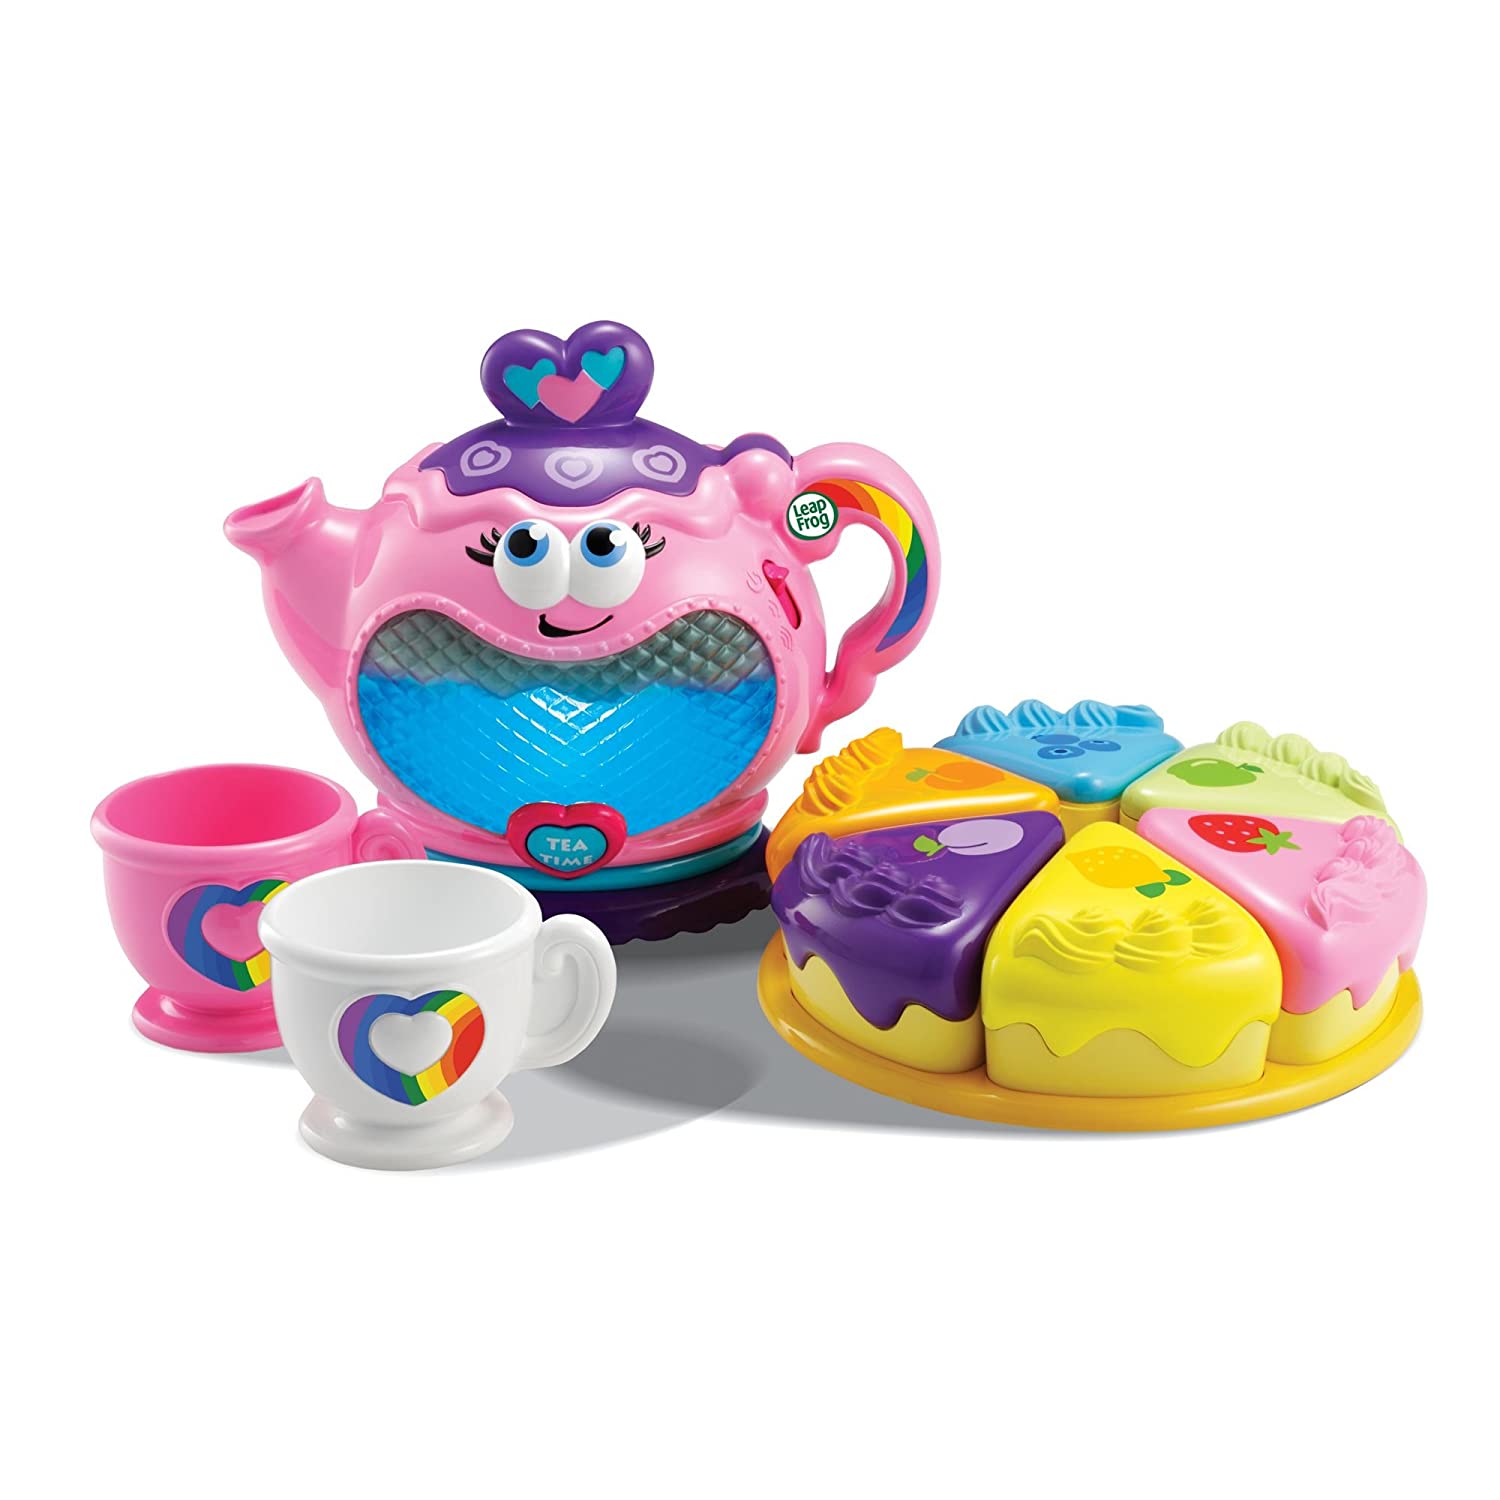 9 Best Kids Tea Sets 2022 - Buying Guide & Reviews 7